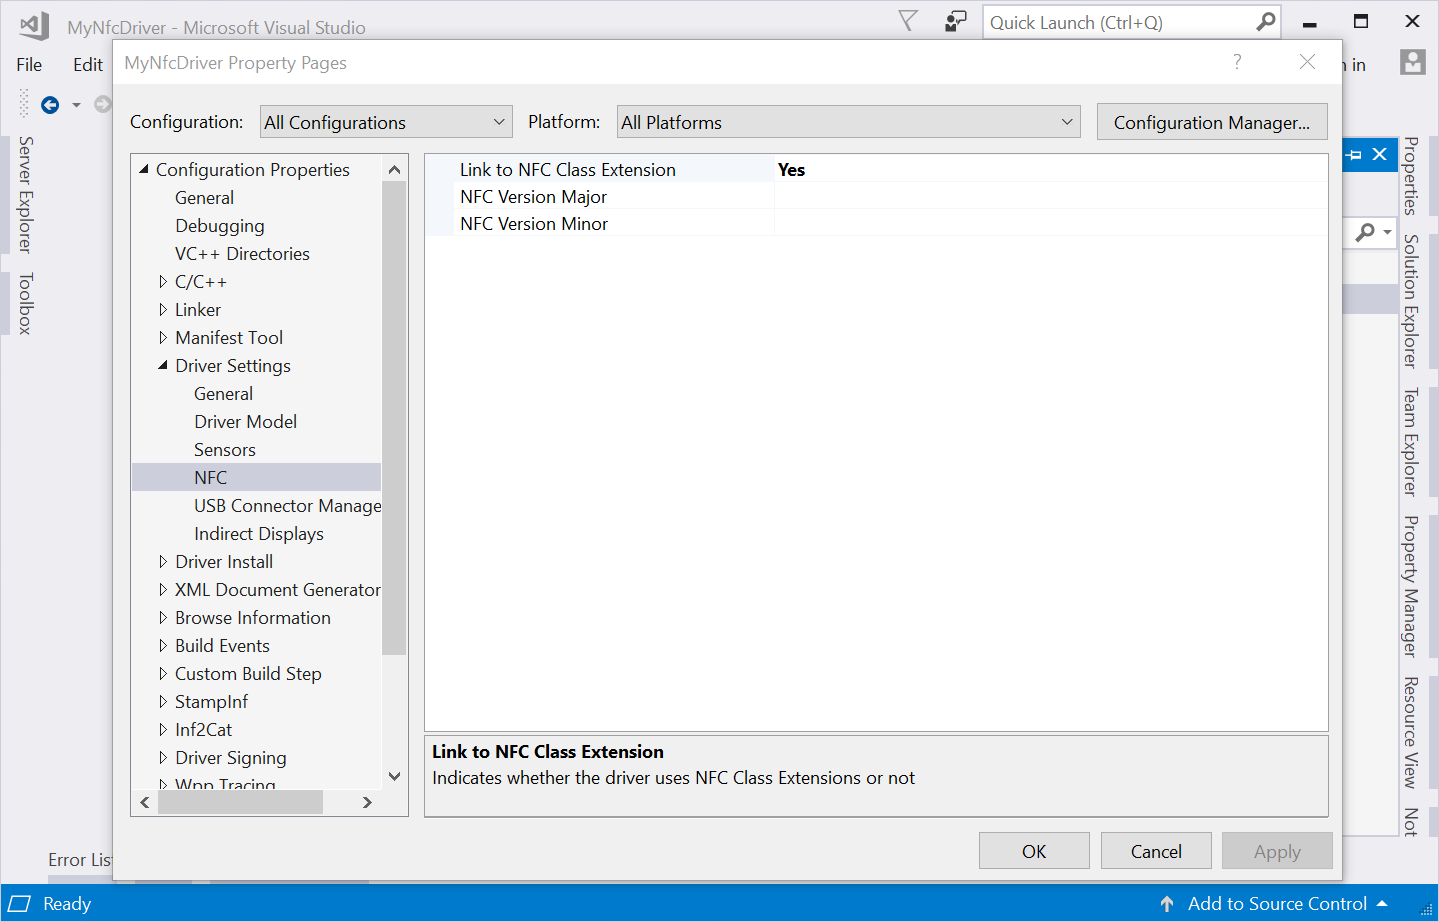 Visual Studio dialog: MyNfcDriver Property Pages, showing "Link to NFC Class Extension" set to "Yes."